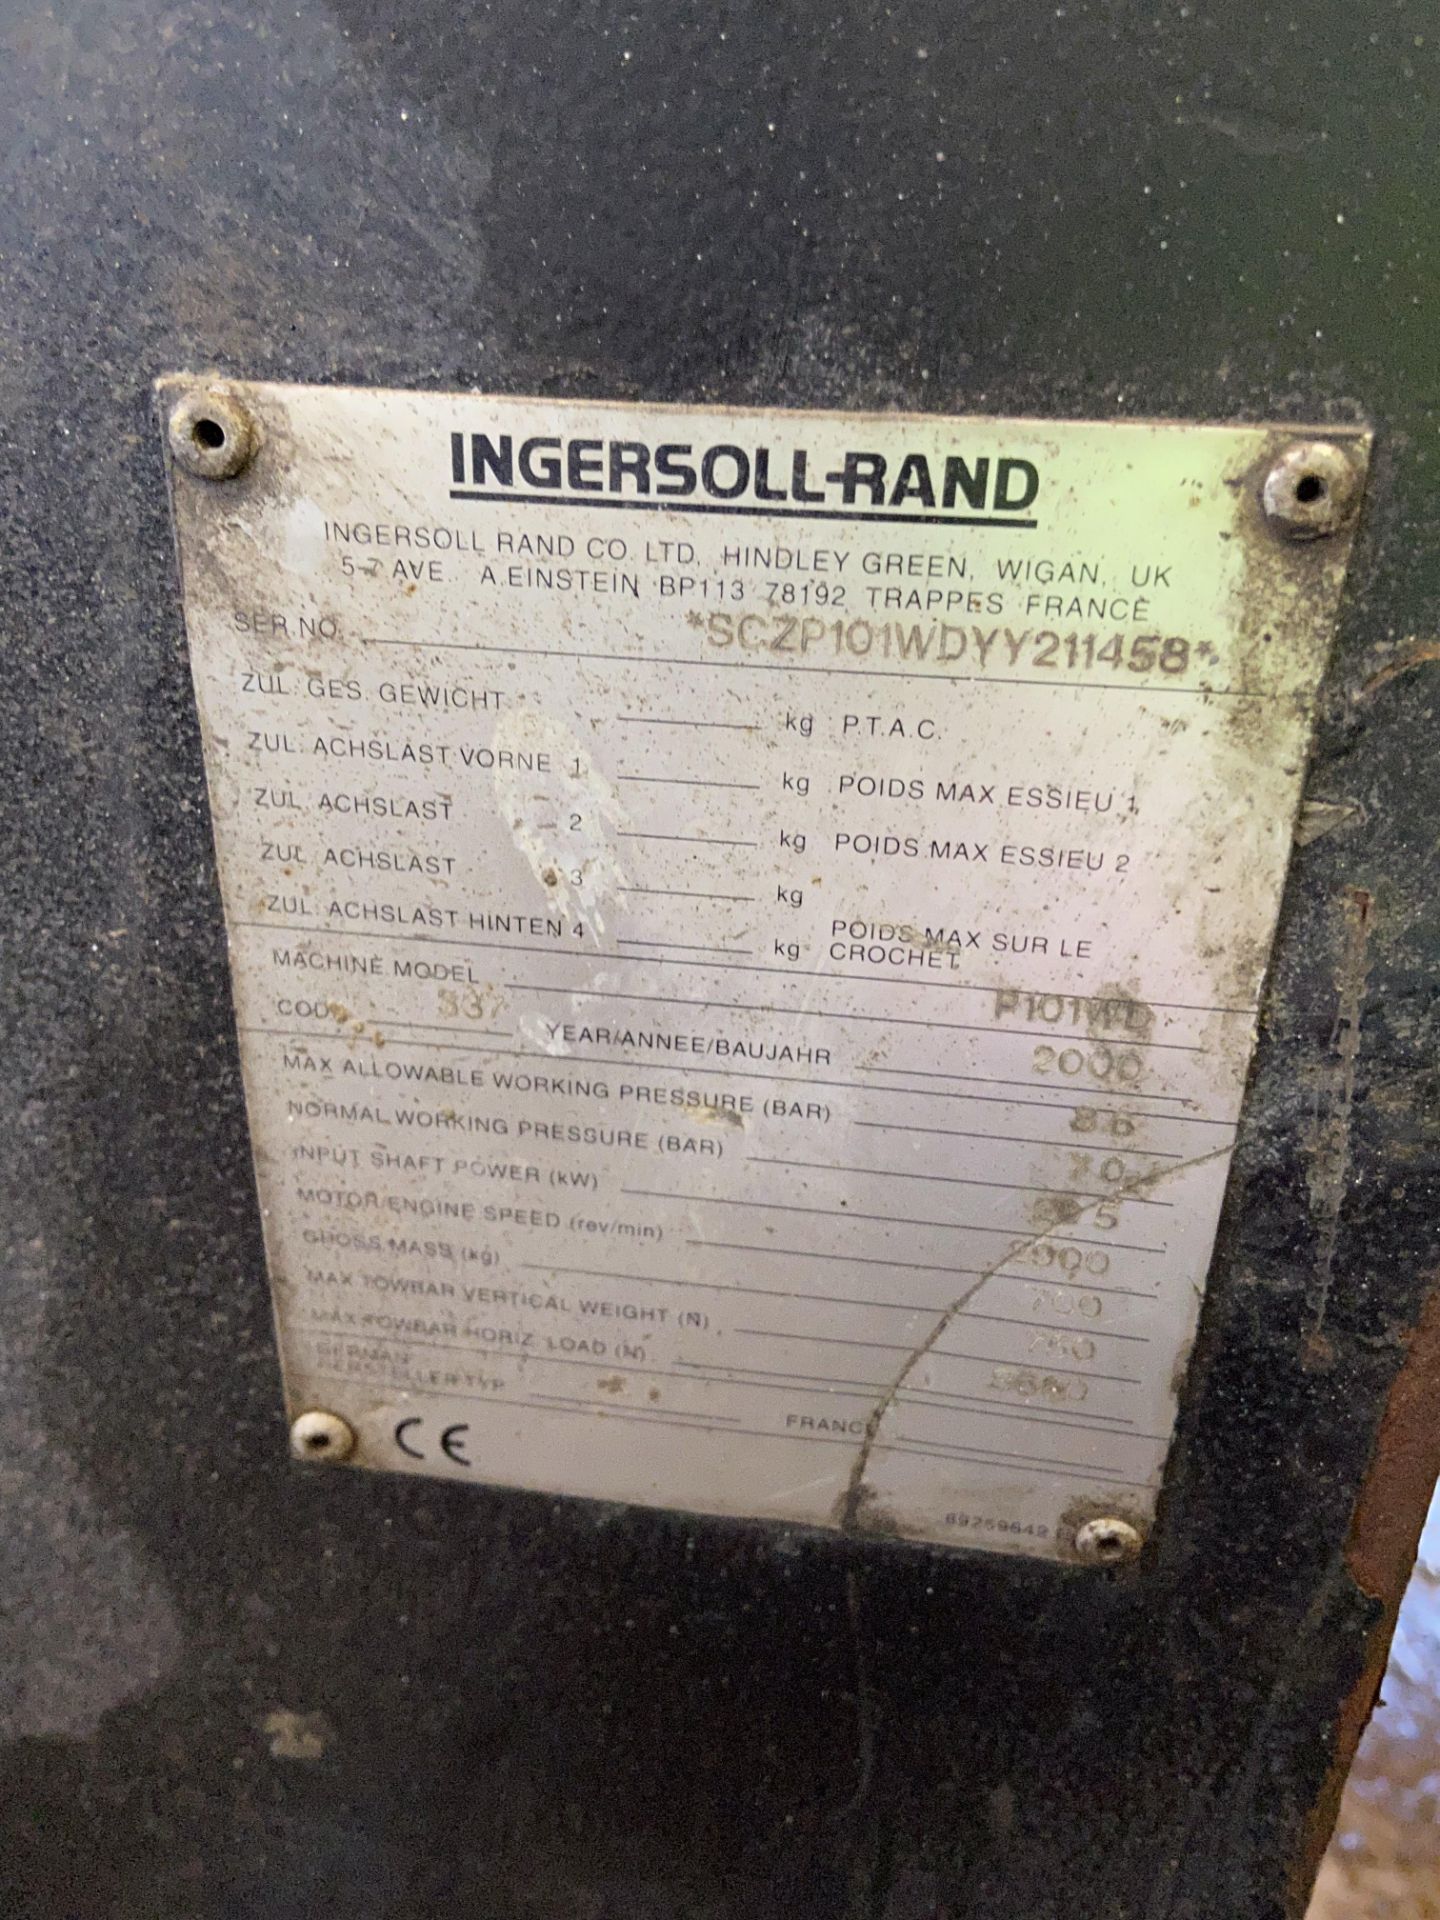 Ingersoll-Rand 337 TRAILER MOUNTED AIR COMPRESSOR, serial no. SCZP101WDYY211458, year of manufacture - Image 3 of 5